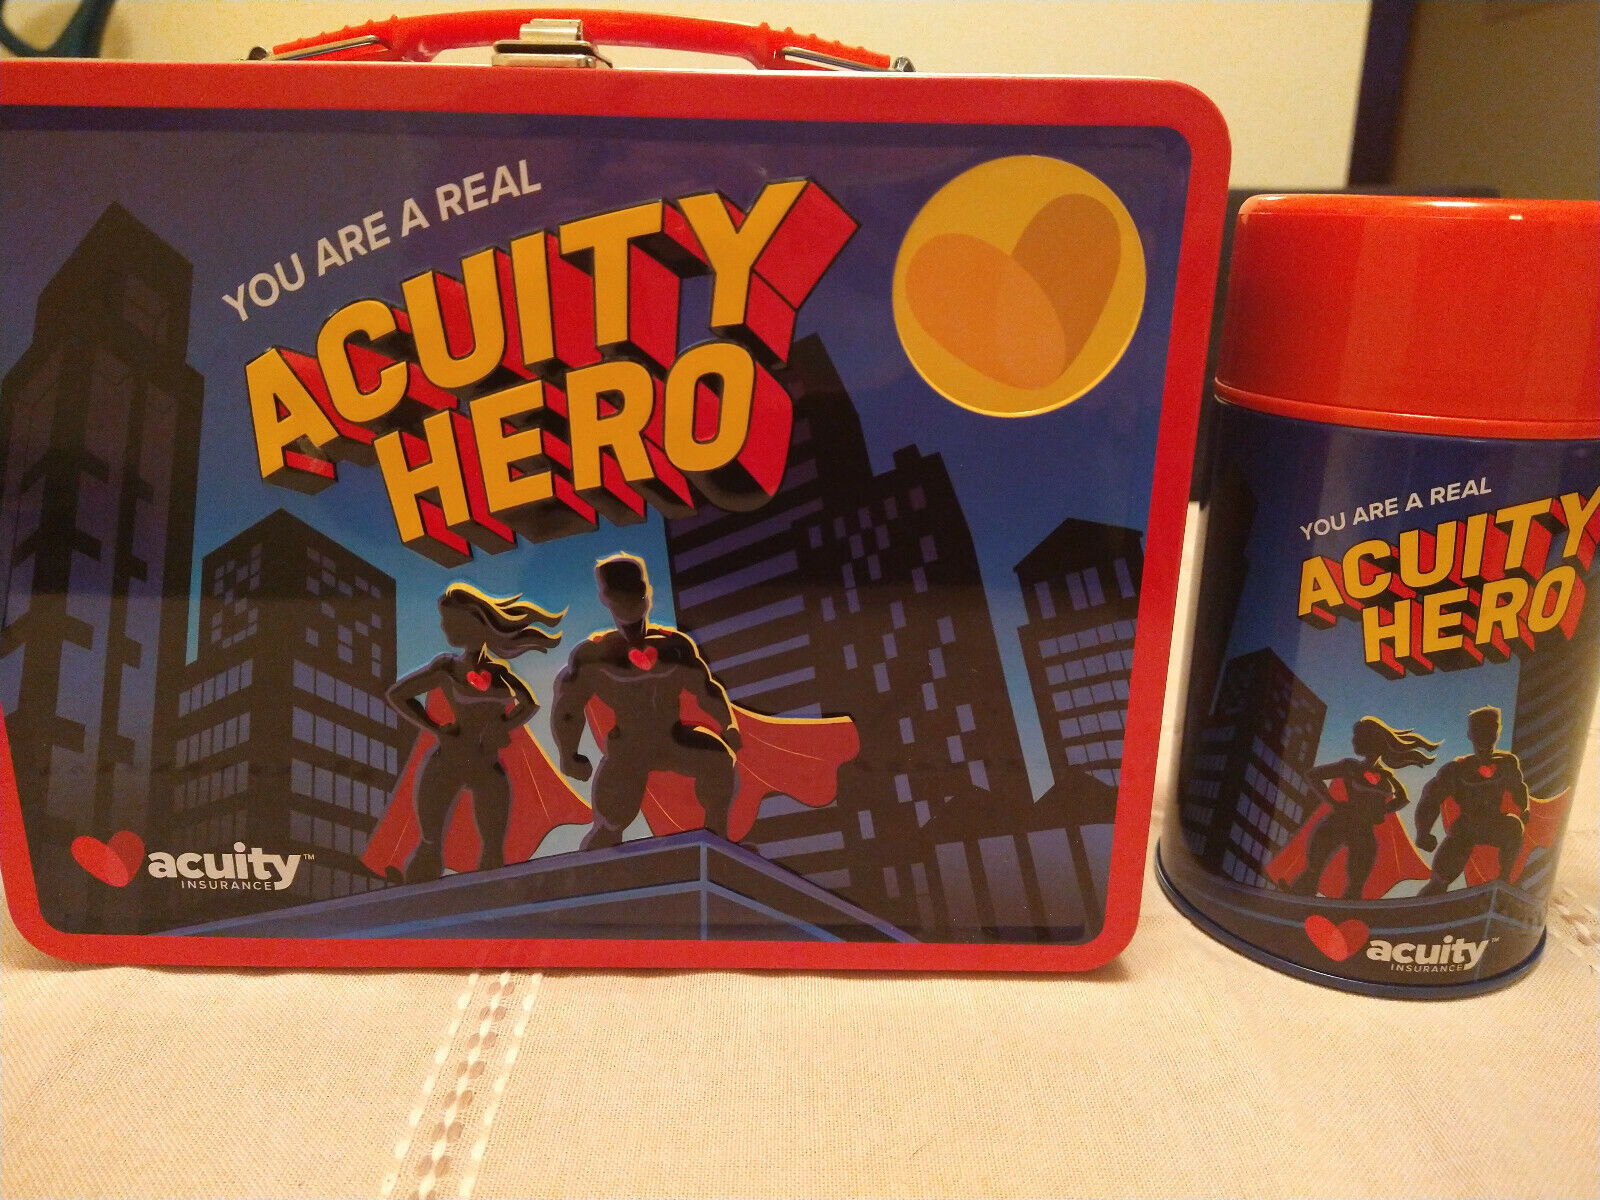 Vtg Acuity Insurance (You Are A Real Acuity Hero) Metal Lunch Box /Thermos